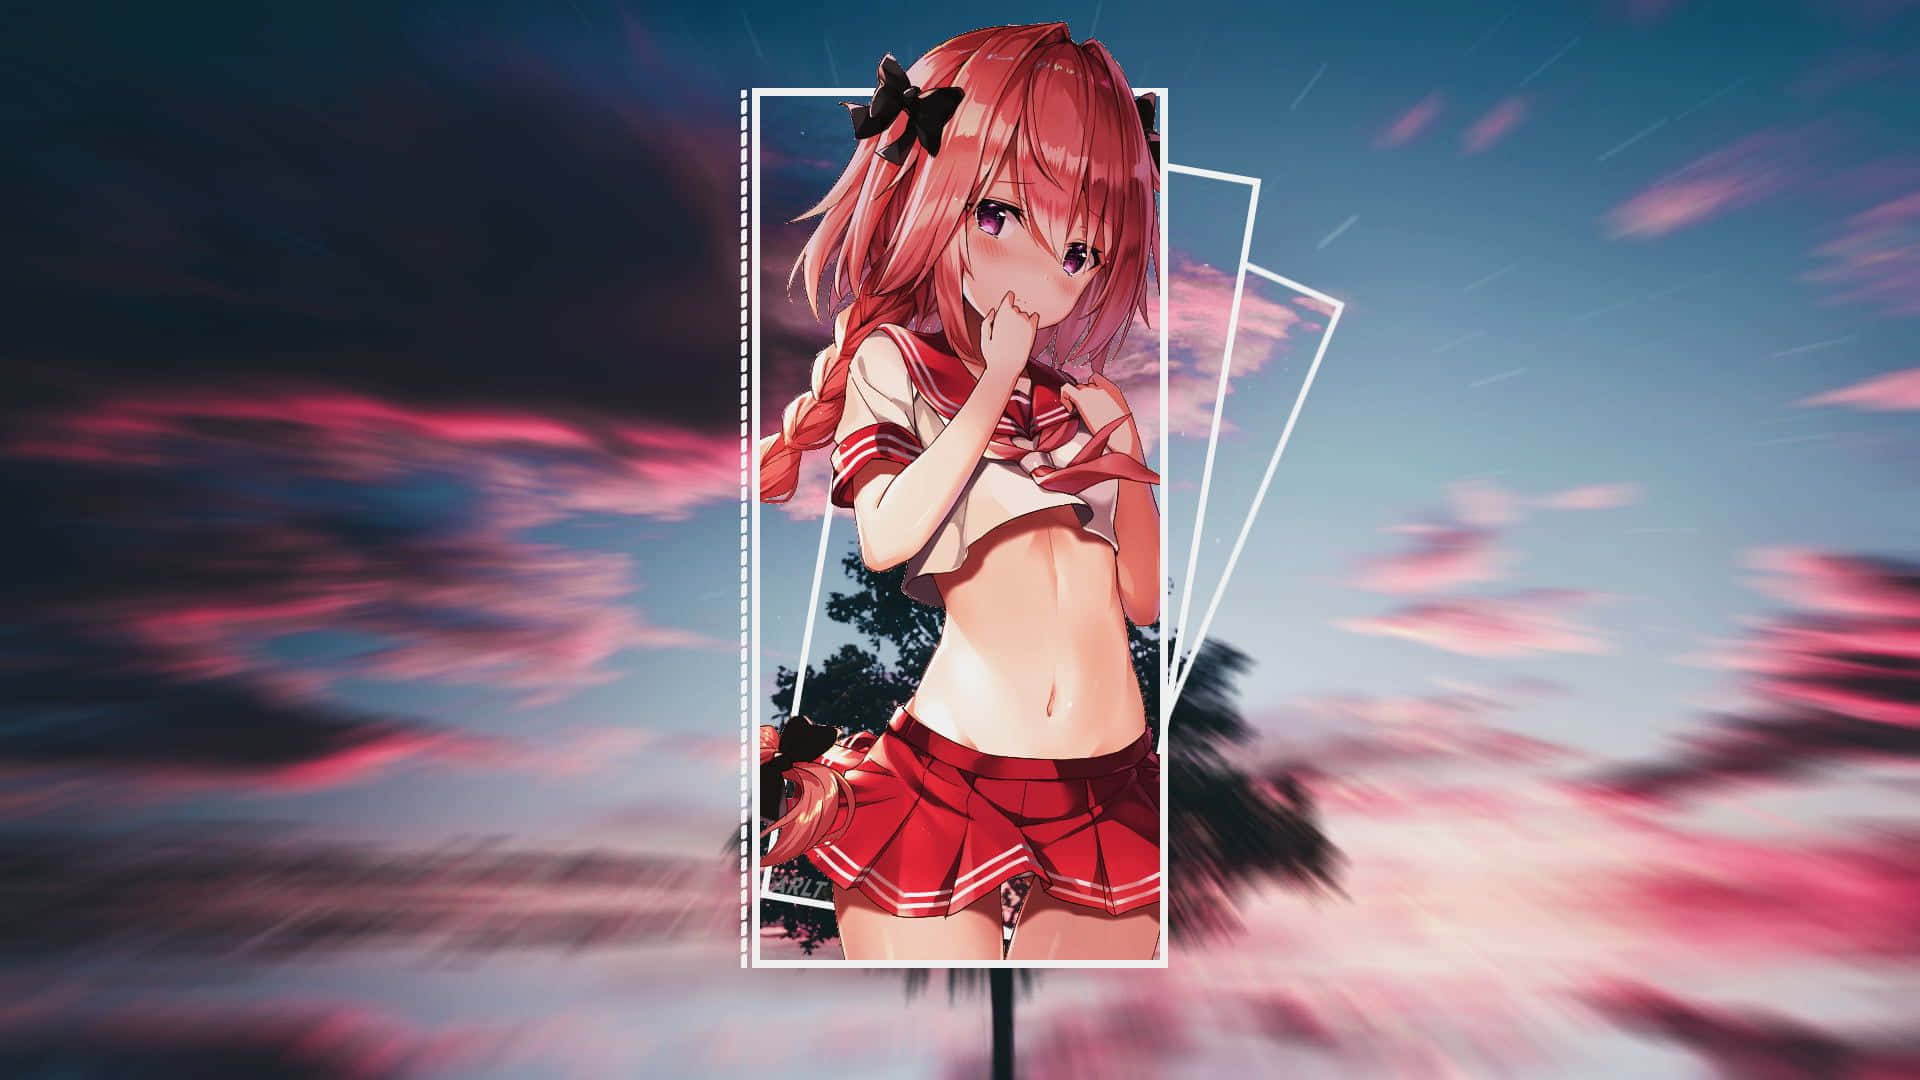 Astolfo from Fate/Apocrypha looking determined